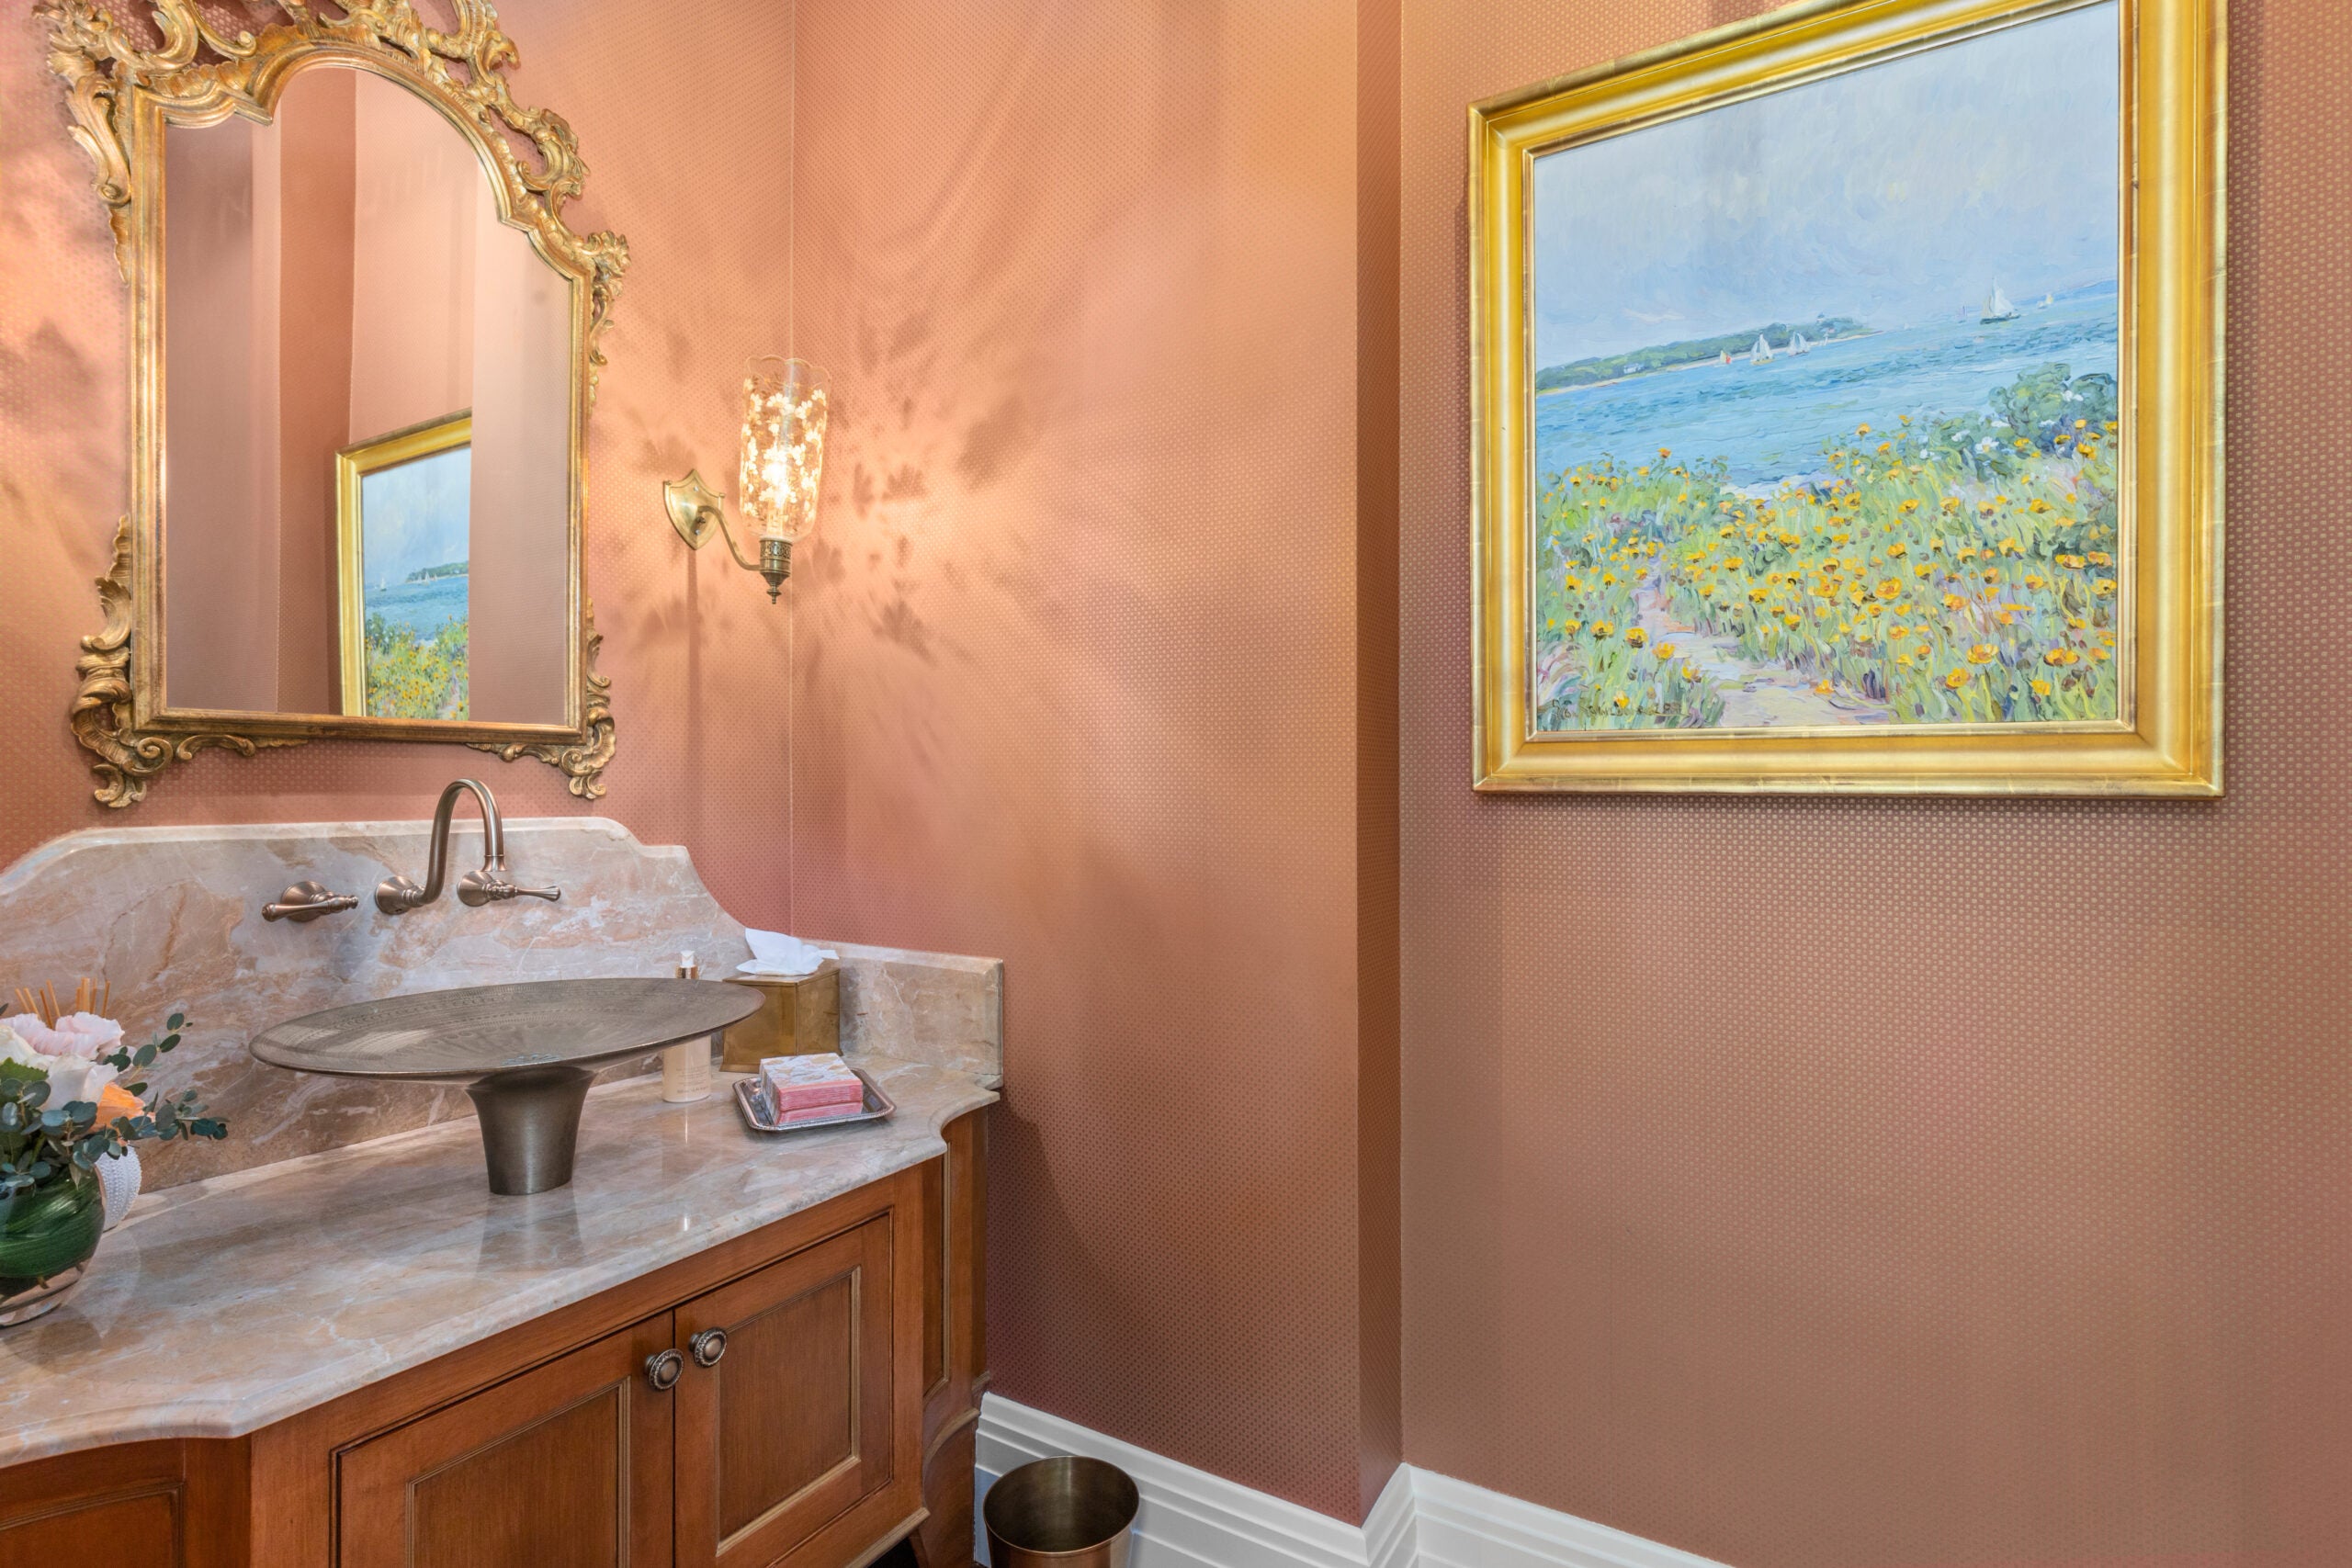 A powder room with a small-pattered wallpaper the color of terra cotta, a gold-framed mirror, a gold-framed picture of a seascape, and a vanity with wood cabinetry, a wall-mounted faucet, and a vessel sink.